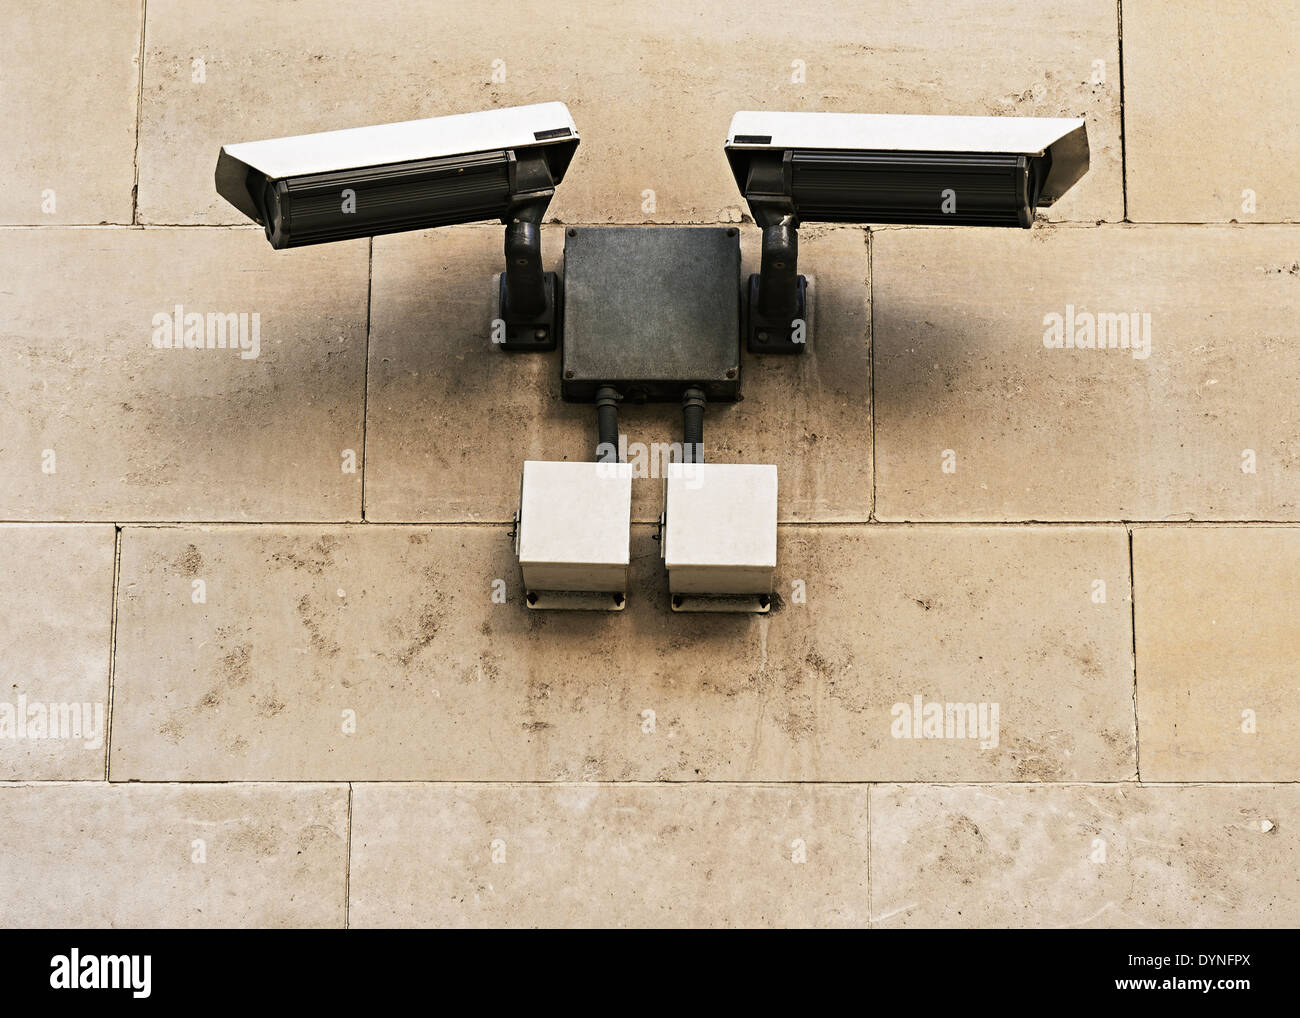 CCTV Security Cameras Mounted on a Wall, London, UK. Stock Photo